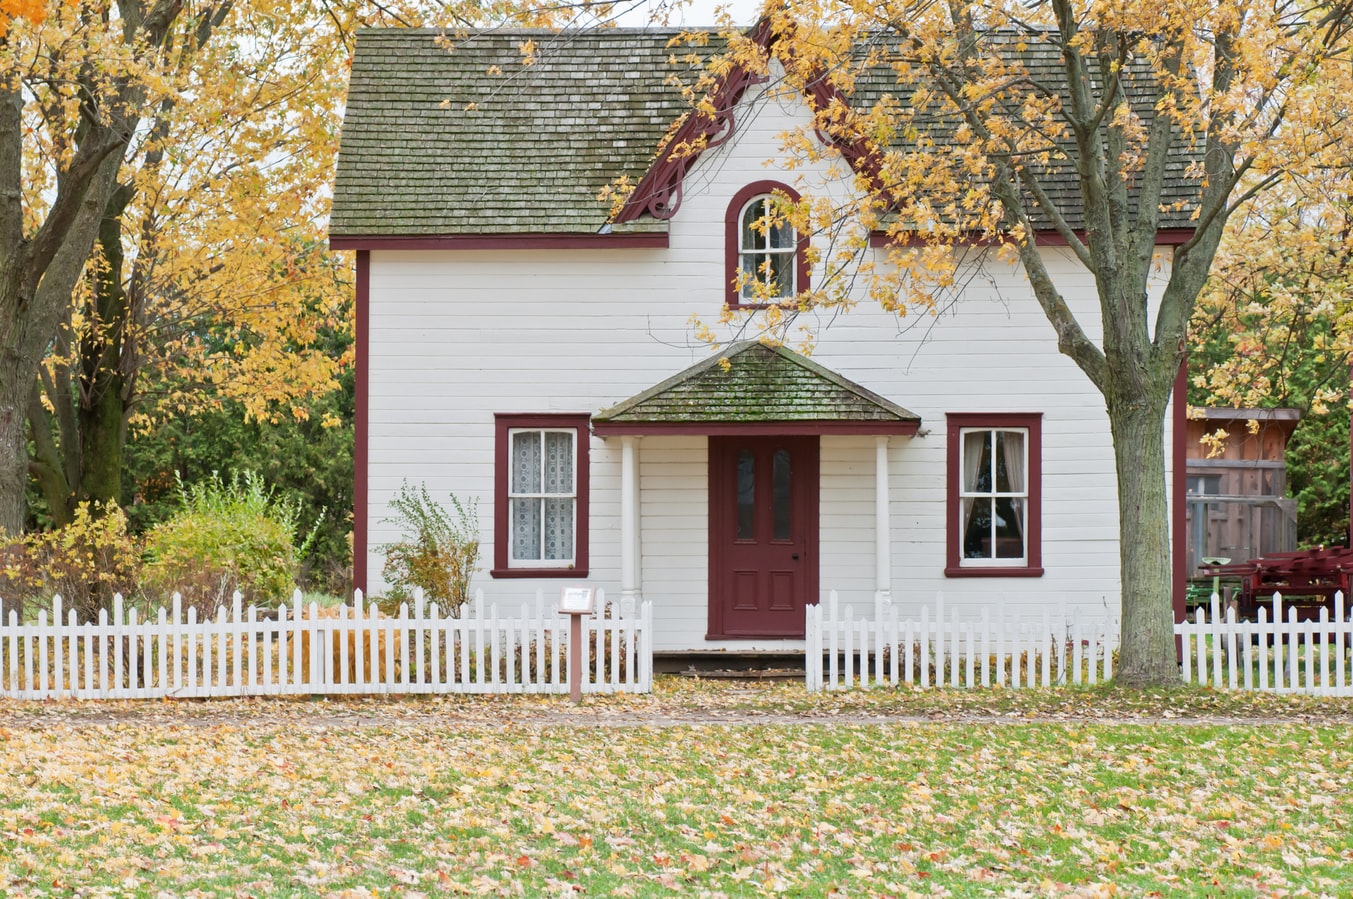 Small House in Autumn with a leaf covered yard and a white picket fence.